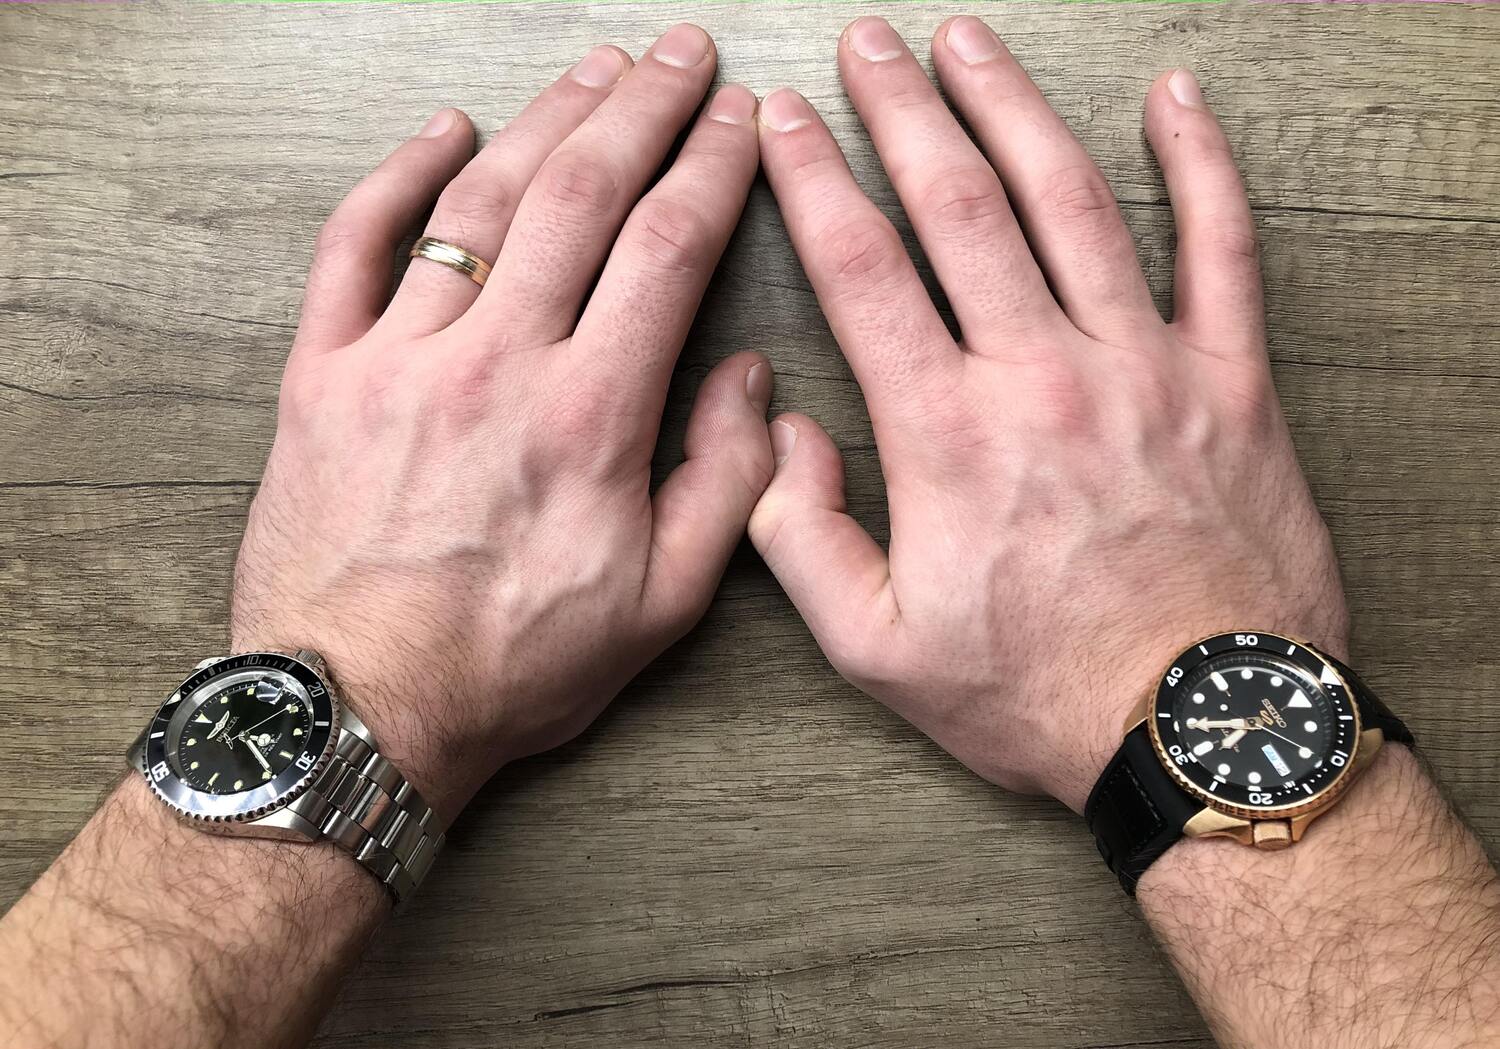 What hand do watches go on